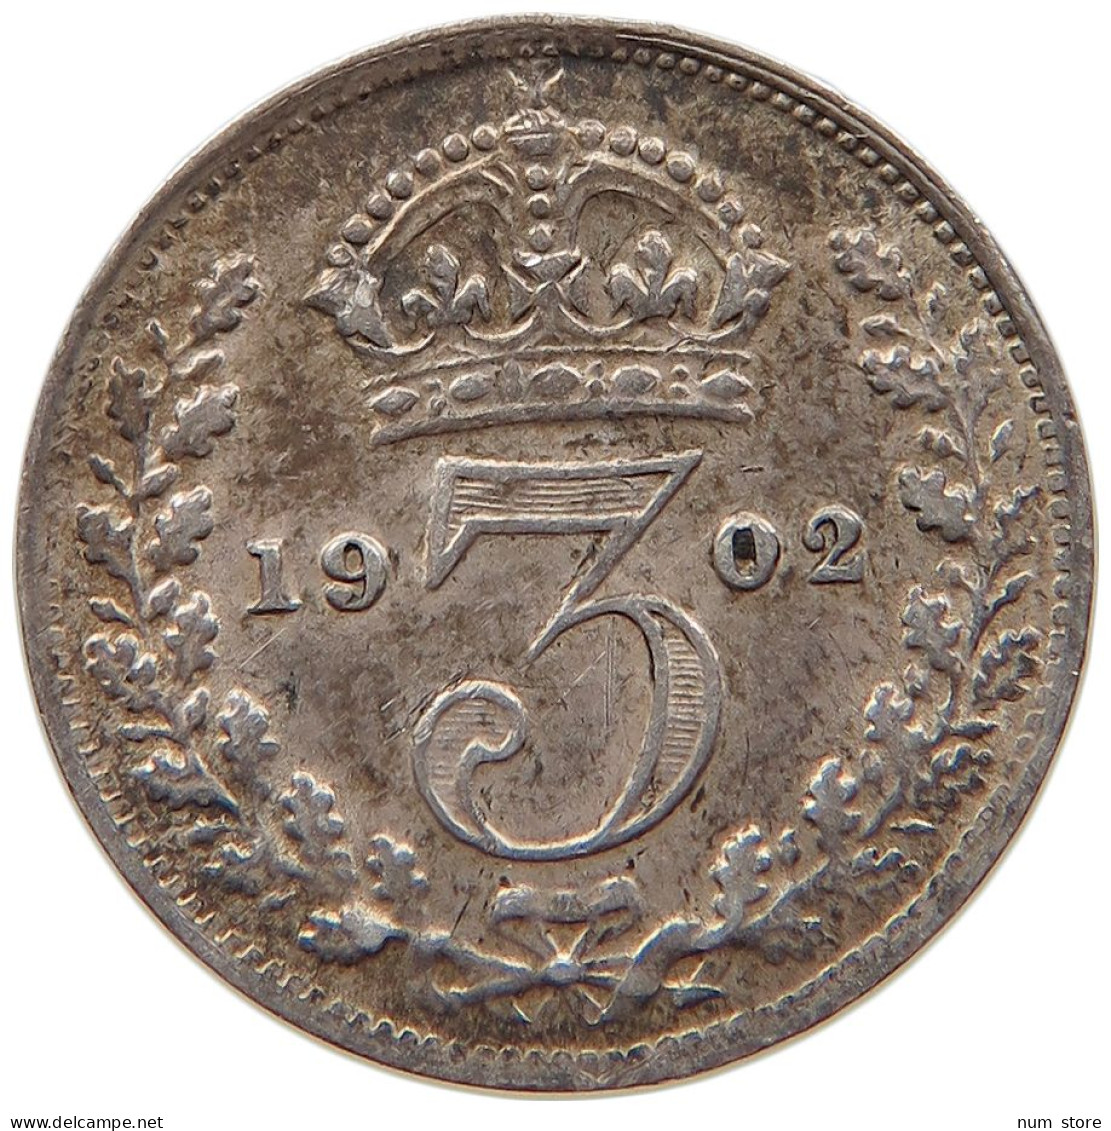 GREAT BRITAIN THREEPENCE 1902 Edward VII., 1901 - 1910 #s001 0039 - F. 3 Pence